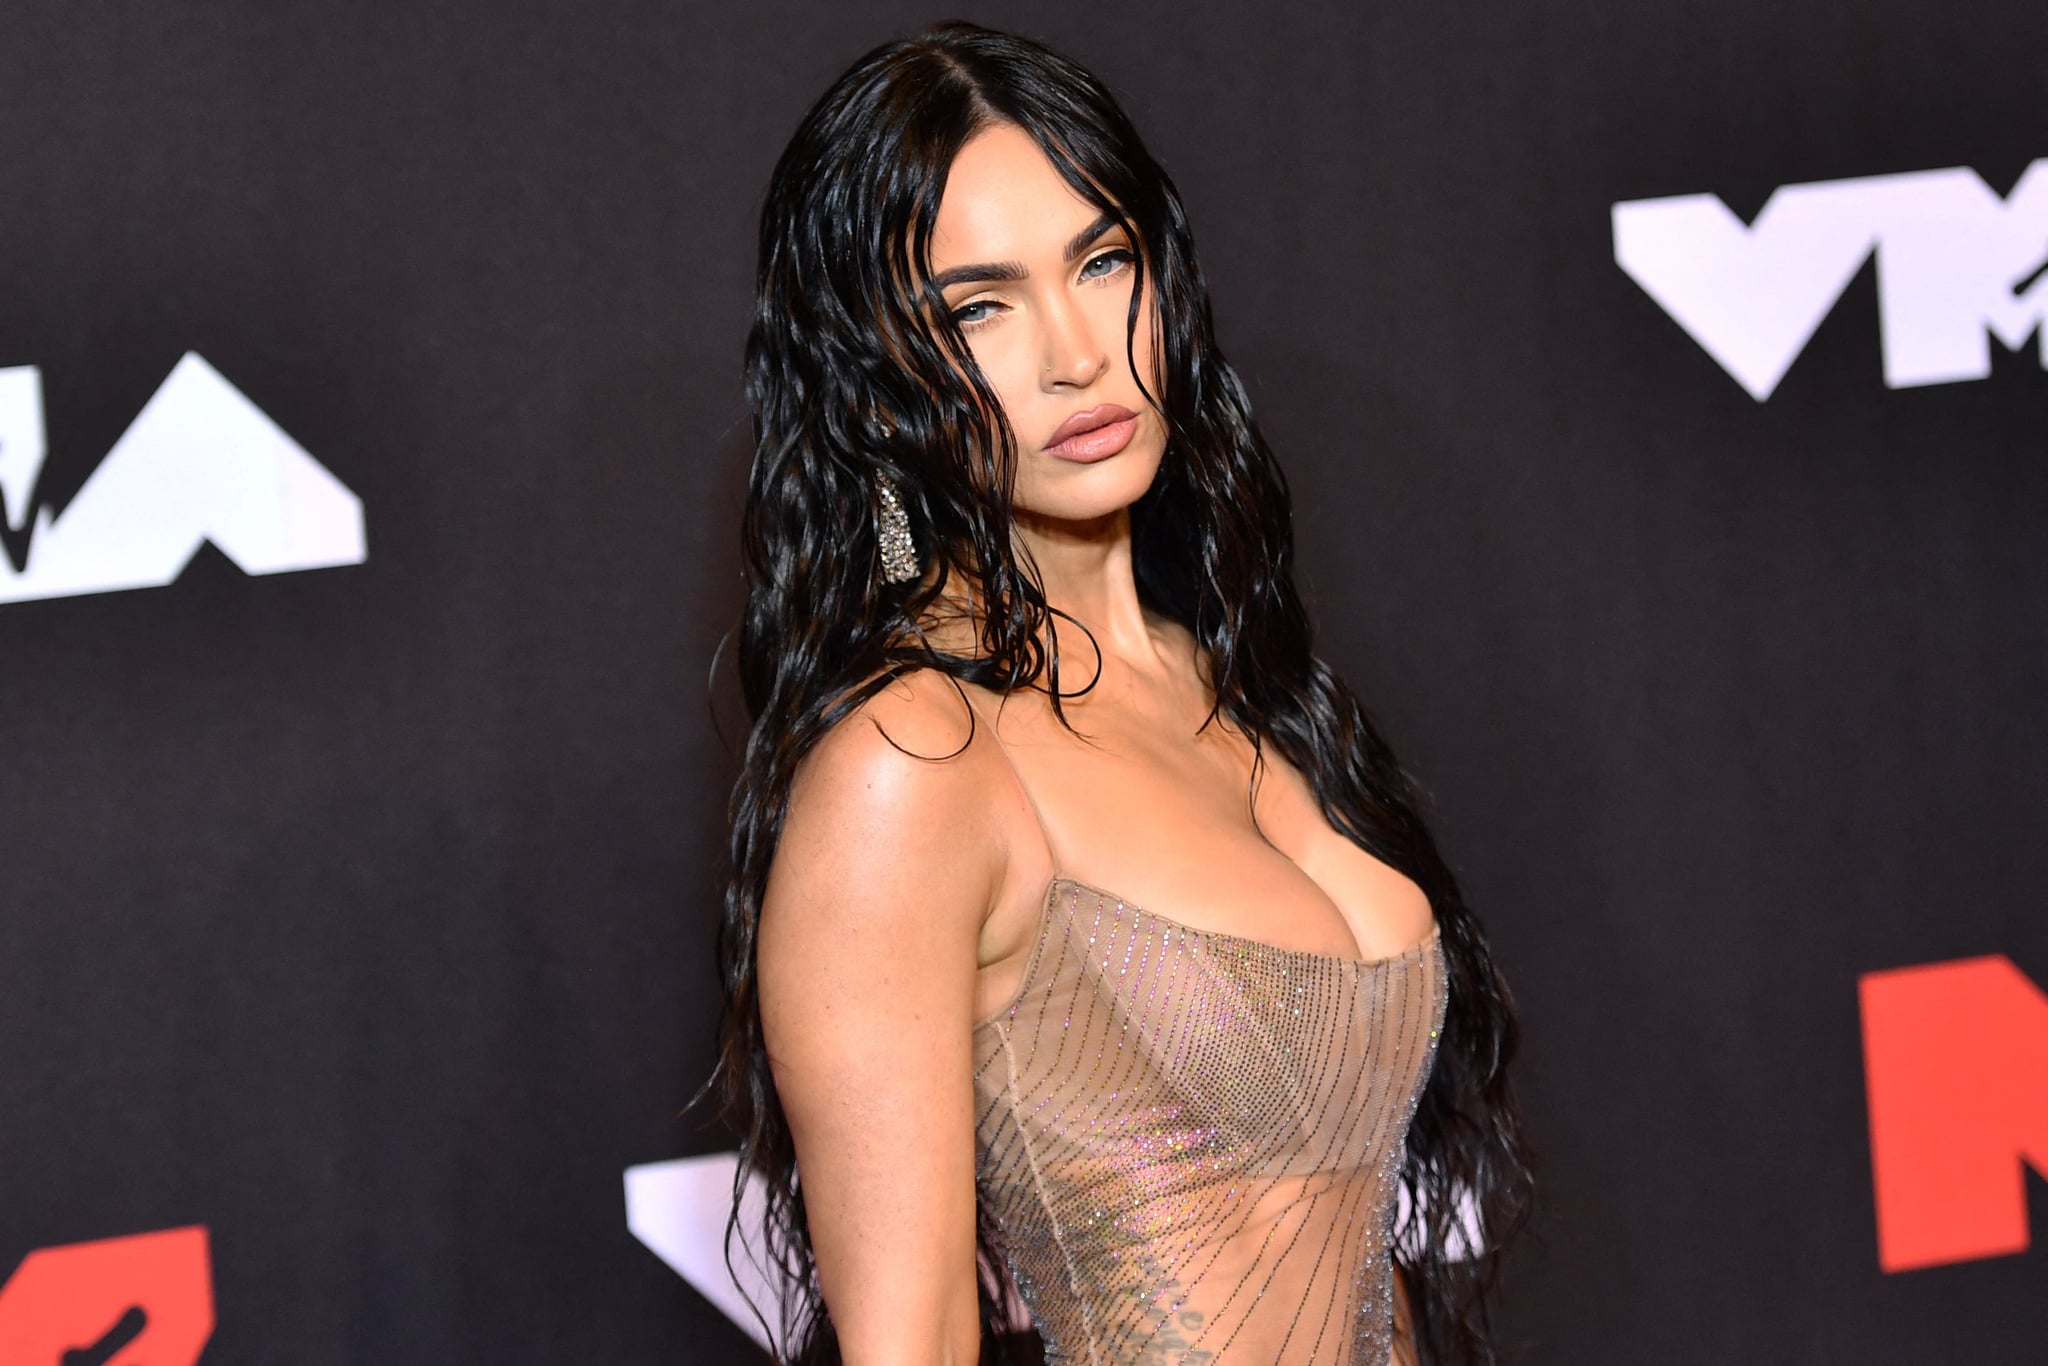 U.S. actress Megan Fox arrives to attend the 2021 MTV Video Music Awards at the Barclays Center in Brooklyn, New York, September 12, 2021. (Photo by ANGELA WEISS/AFP) (Photo by ANGELA WEISS/AFP). via Getty Images)